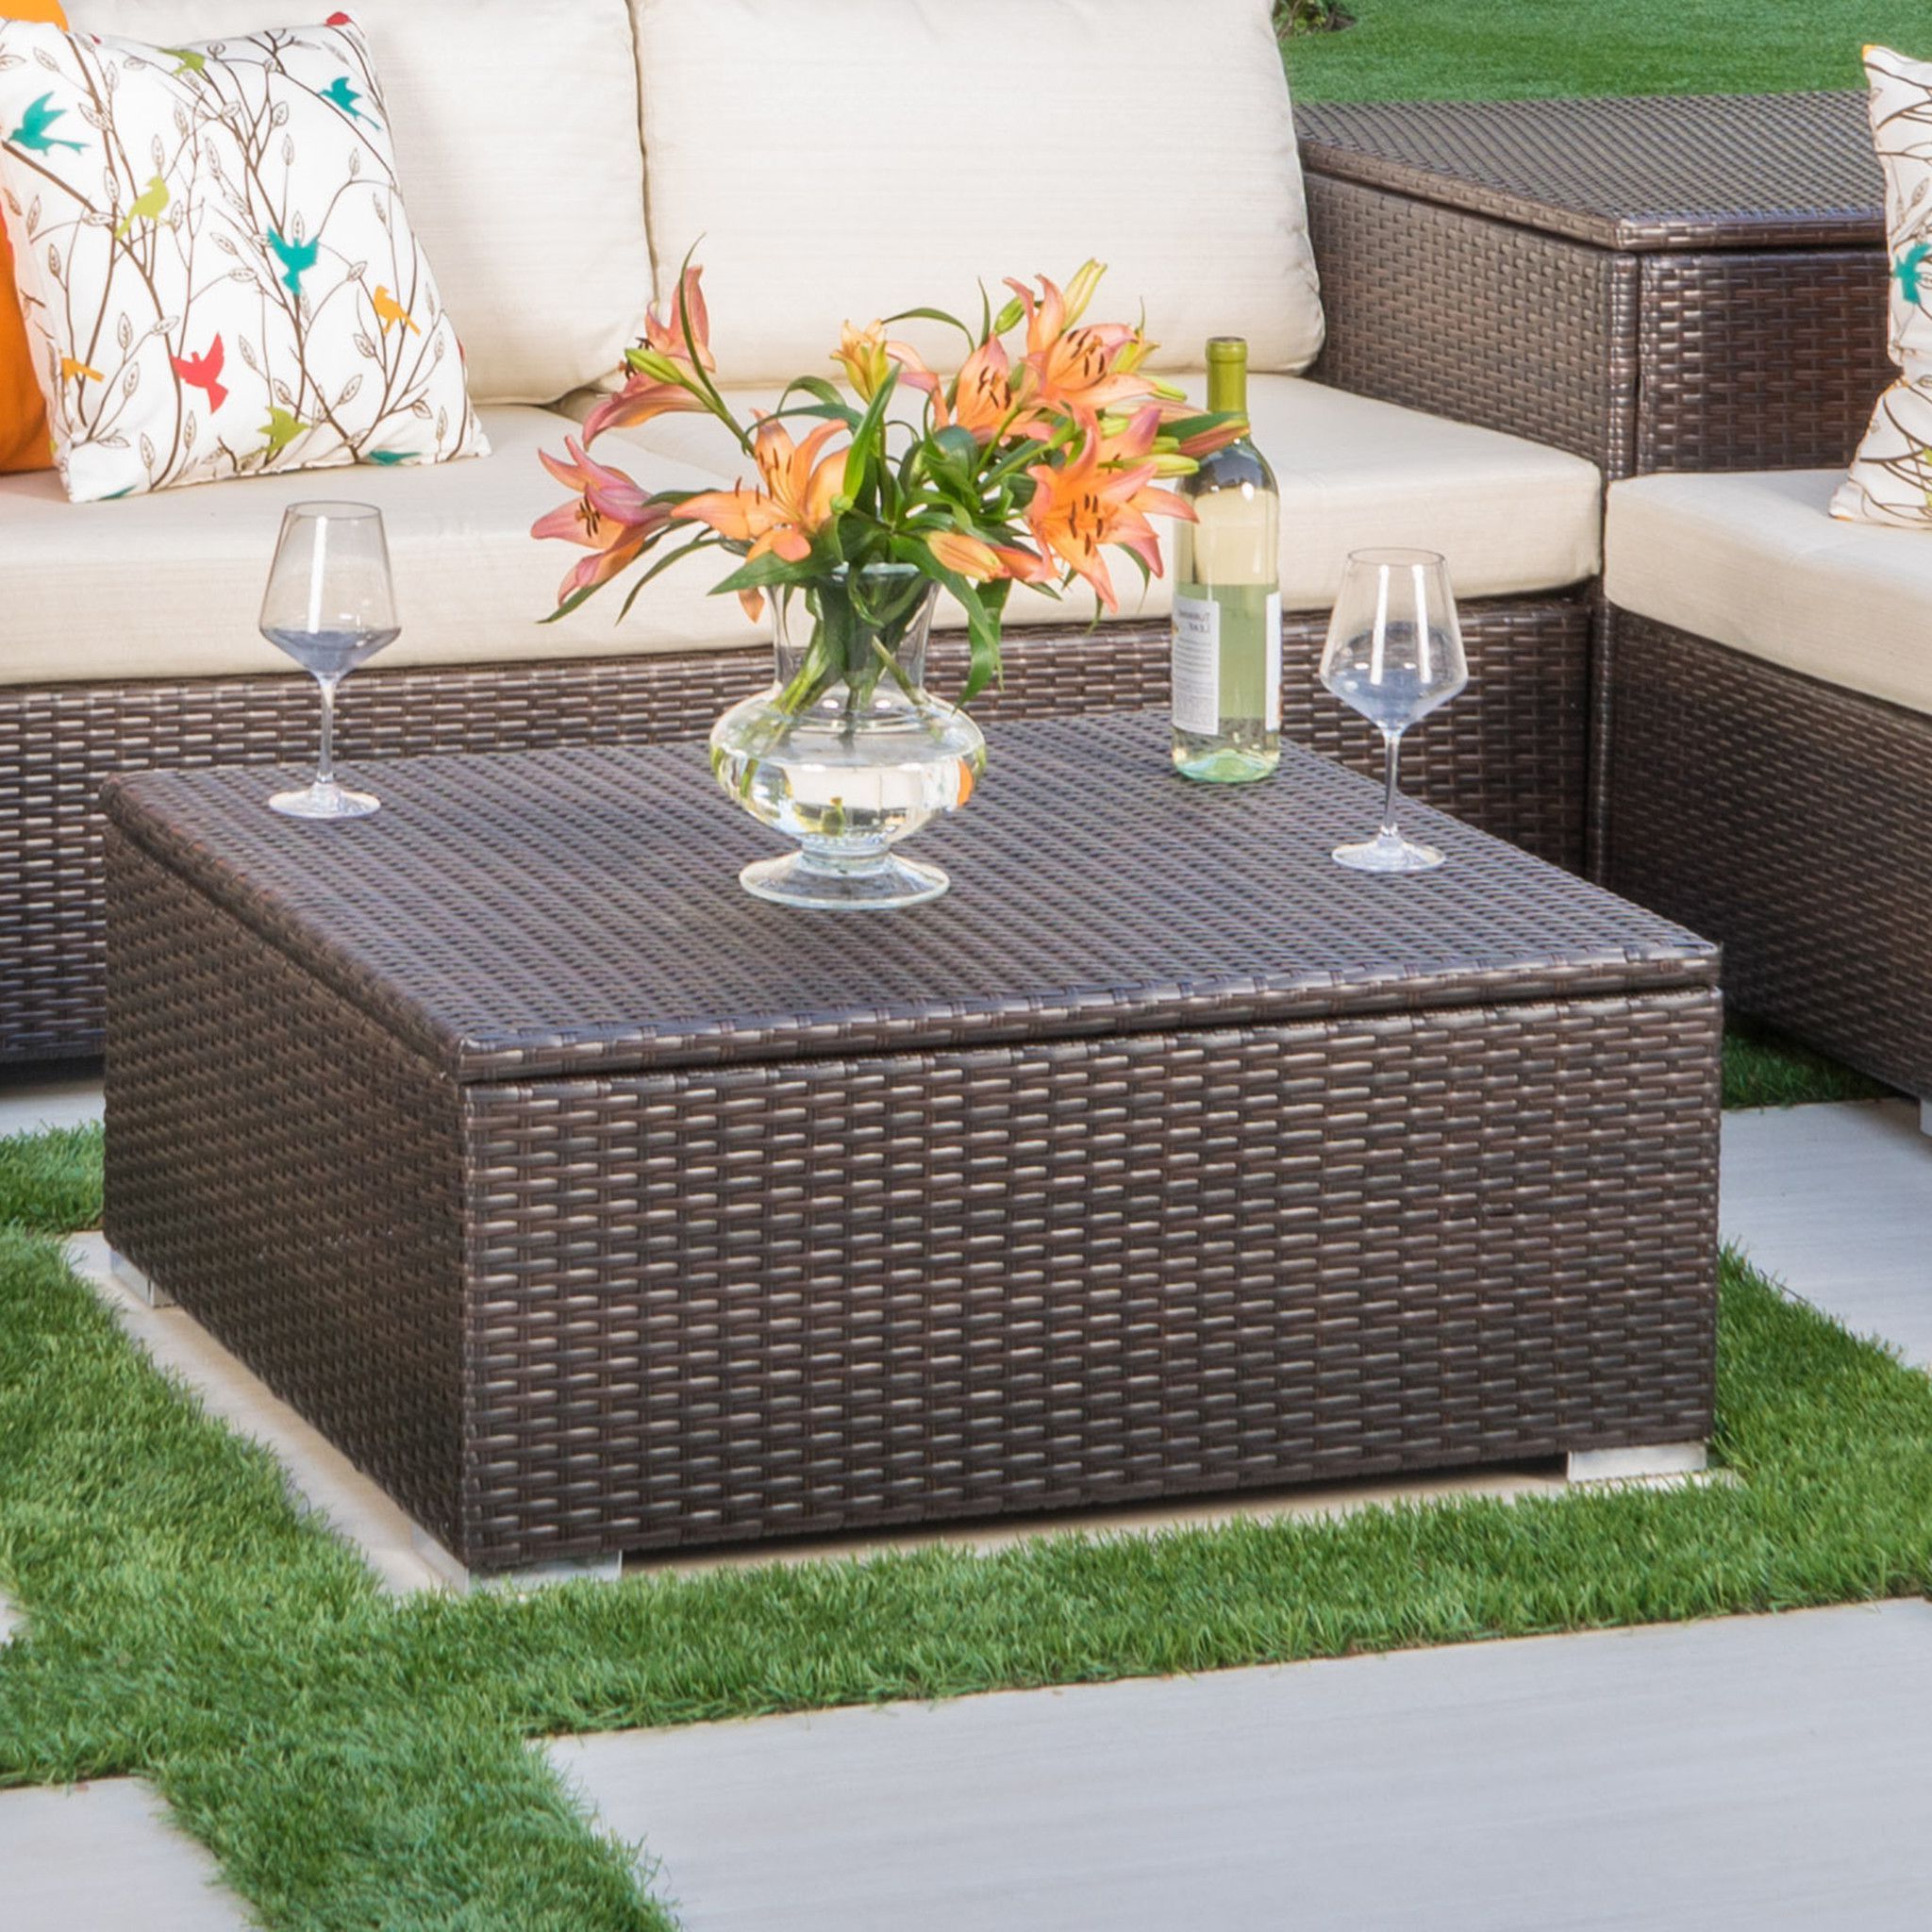 San Louis Obispo Outdoor Wicker Storage Coffee Table Coffee Table Cover Throughout Most Current Outdoor Coffee Tables With Storage (Photo 1 of 15)